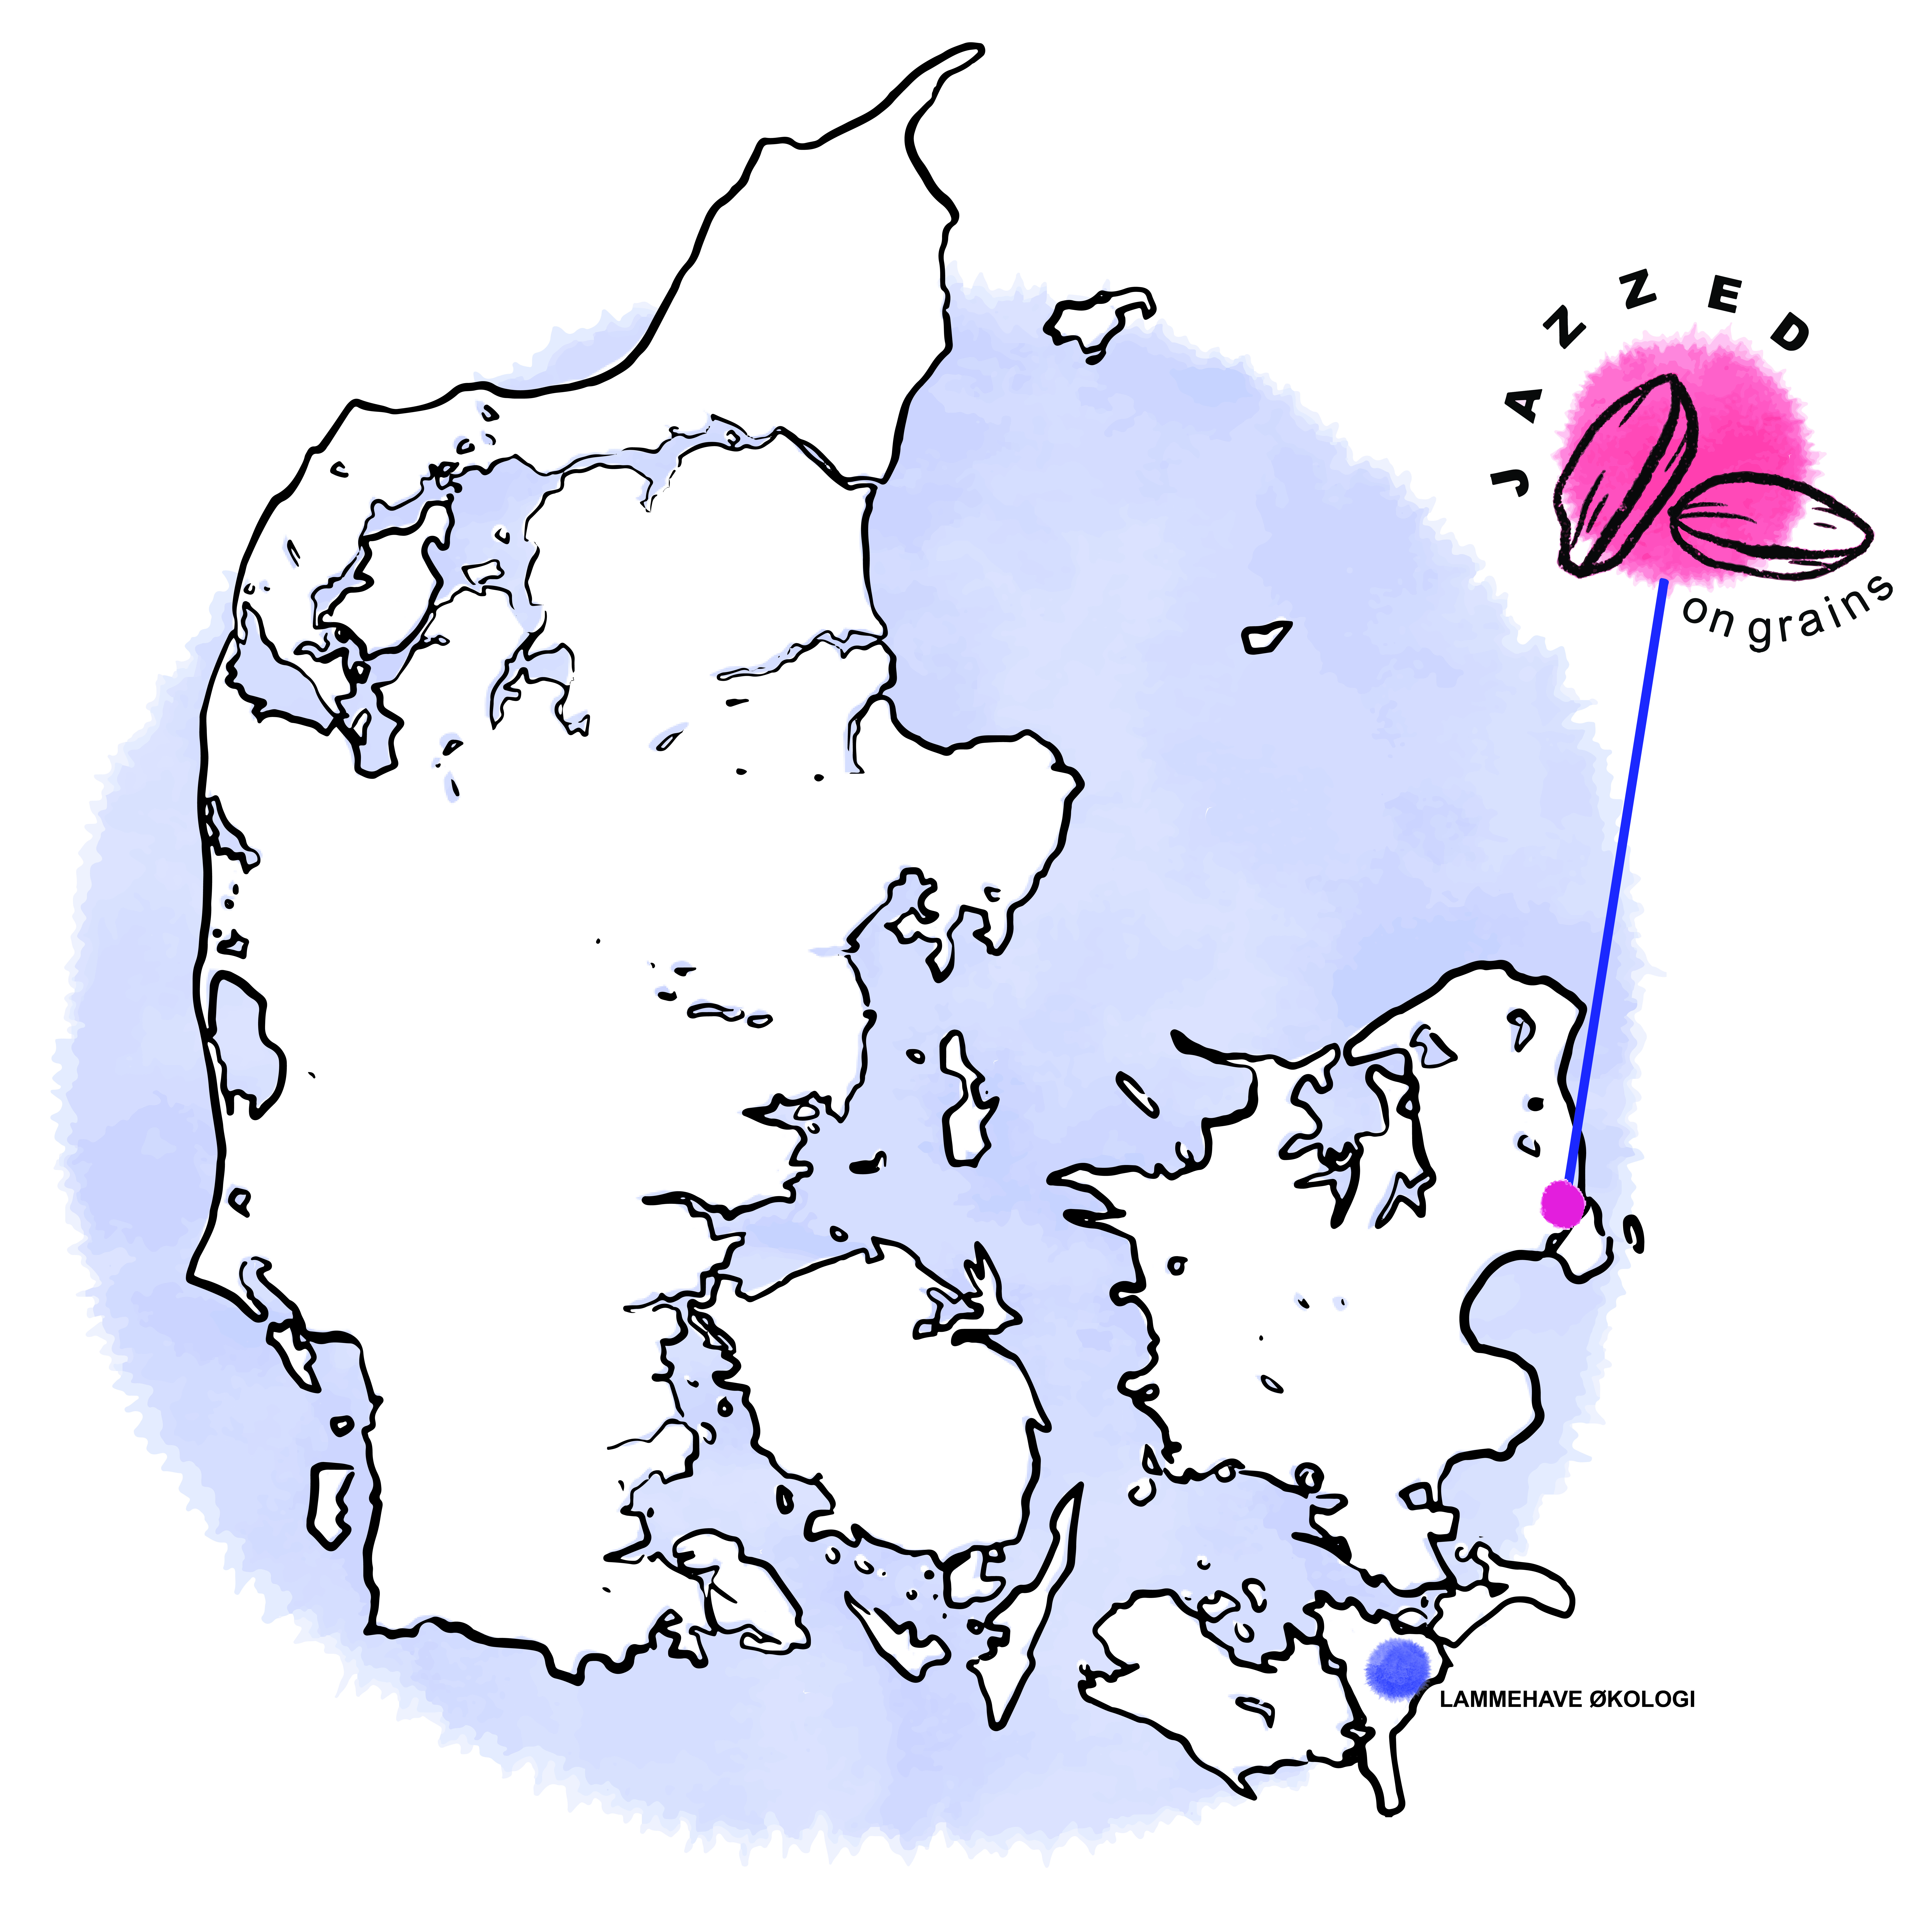 Map of Denmark with two spots marked, one on Falster and one in Copenhagen. The one in Copenhagen is Jazzed on Grains location, the one on faster is Lammehave.